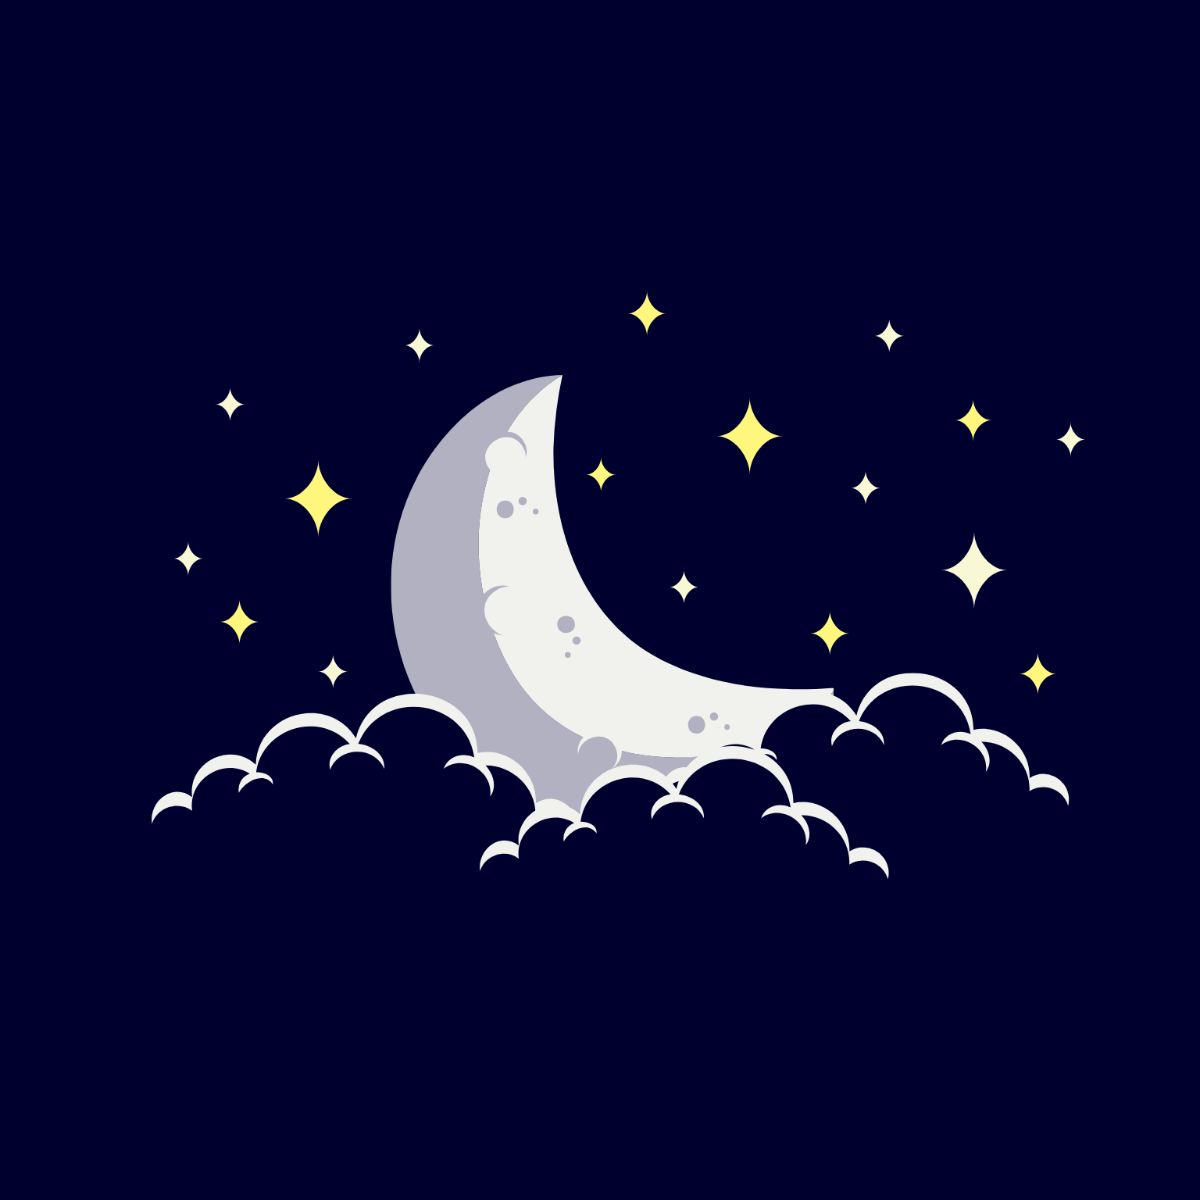 Crescent Moon and Star Vector Template